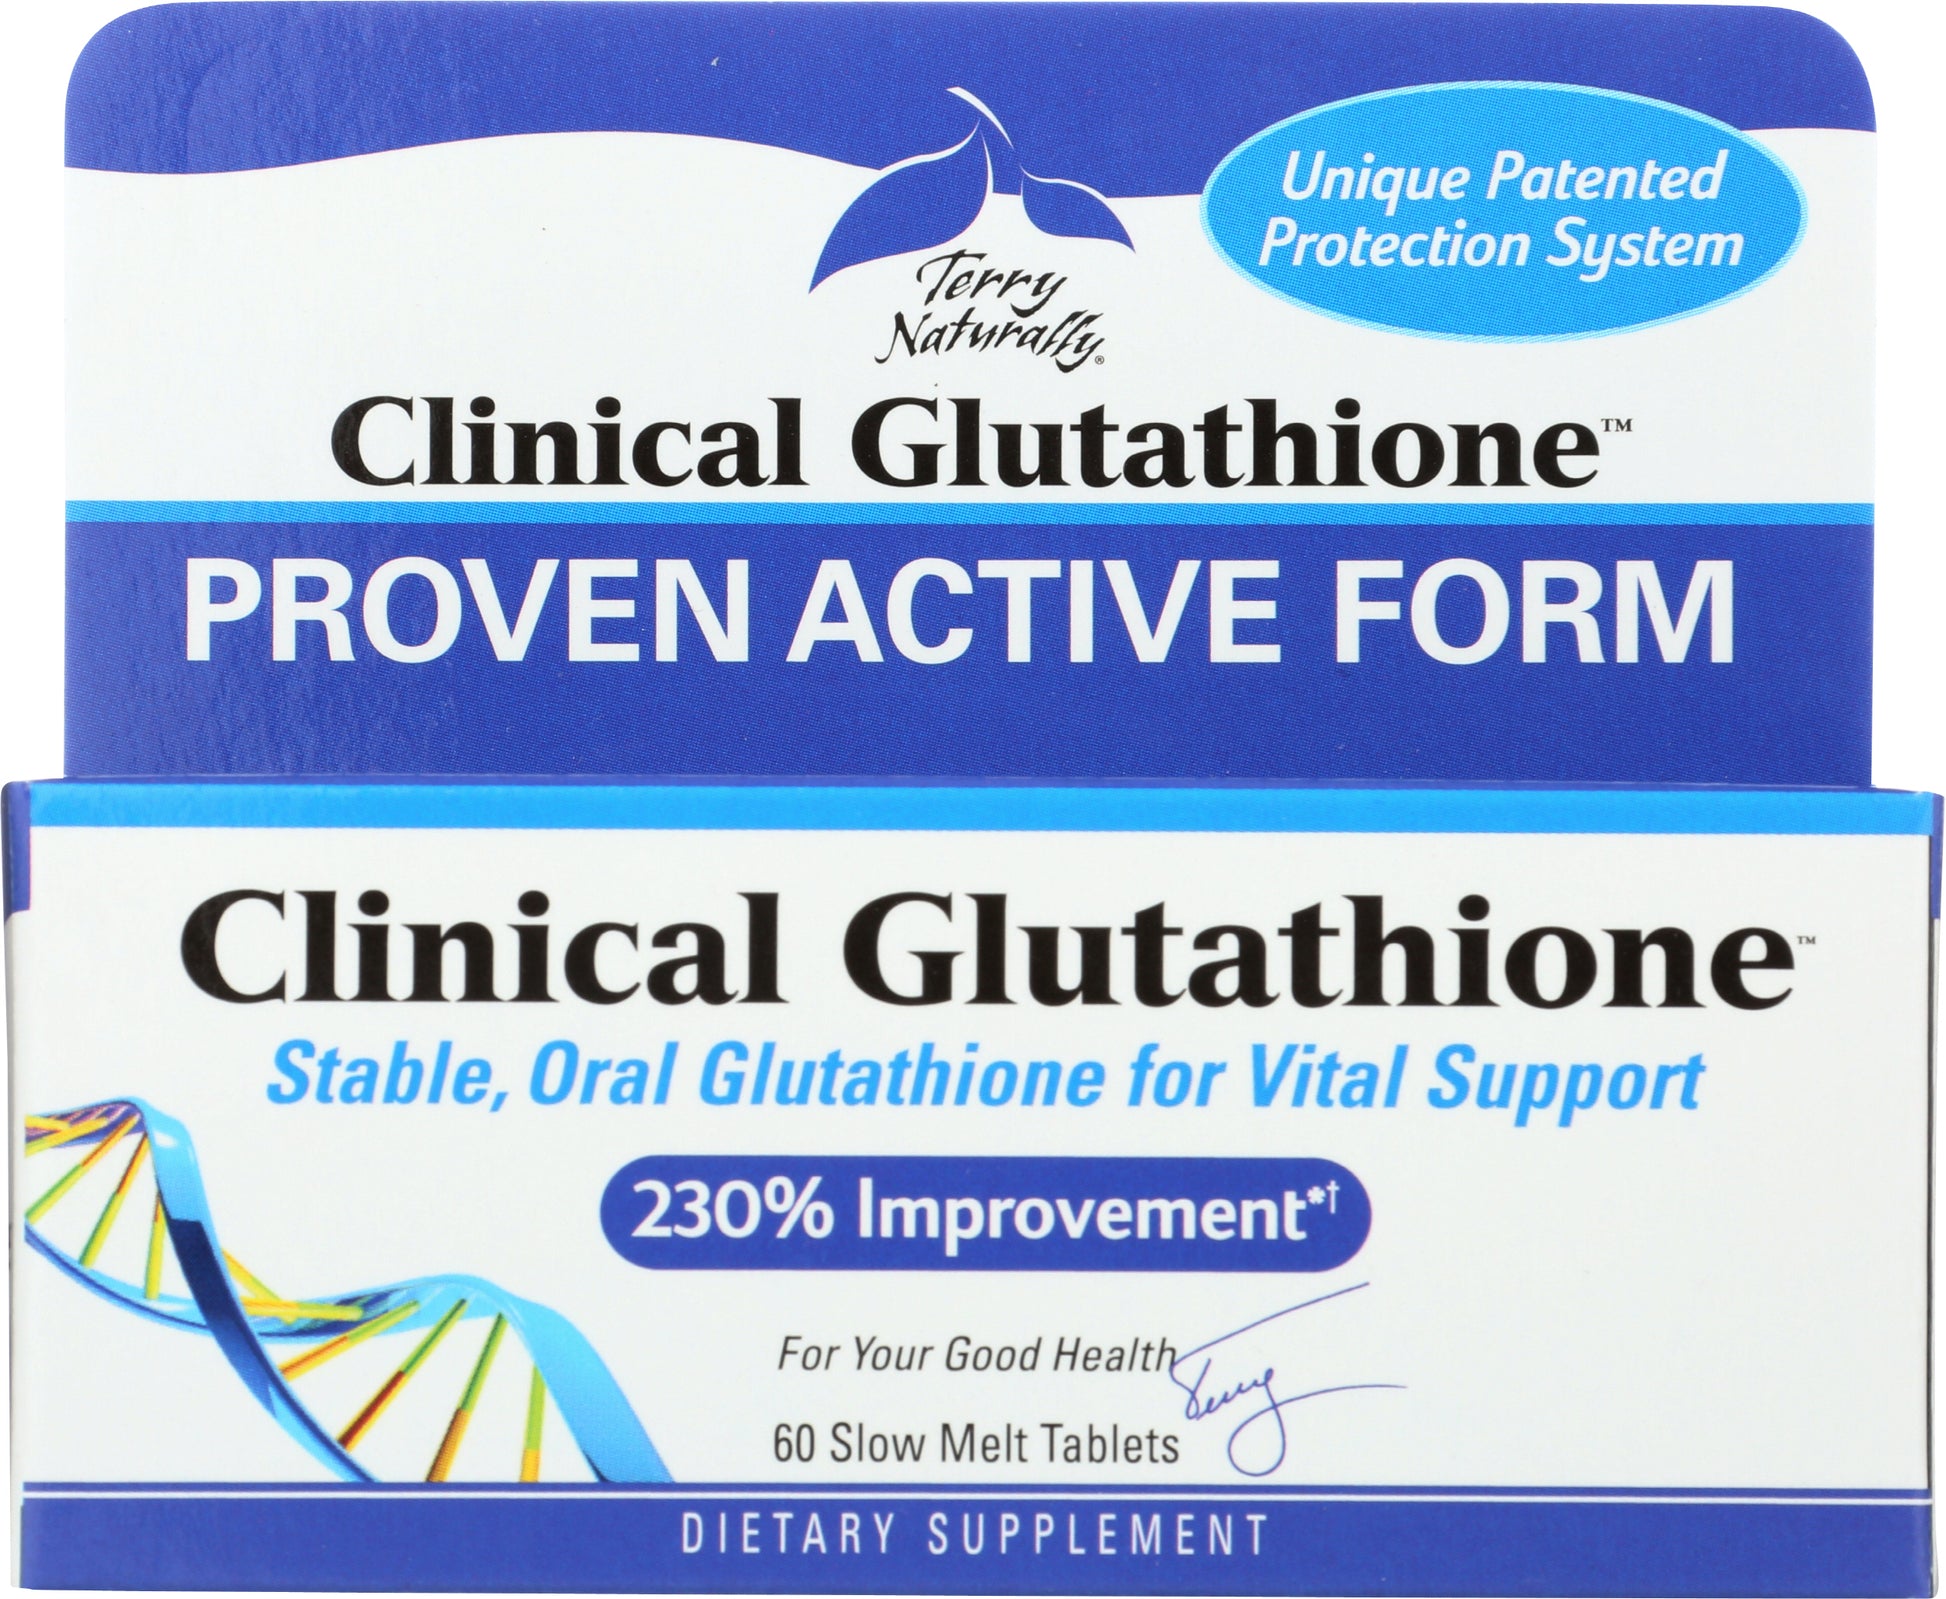 Terry Naturally Clinical Glutathione 60 Slow Melt Tablets